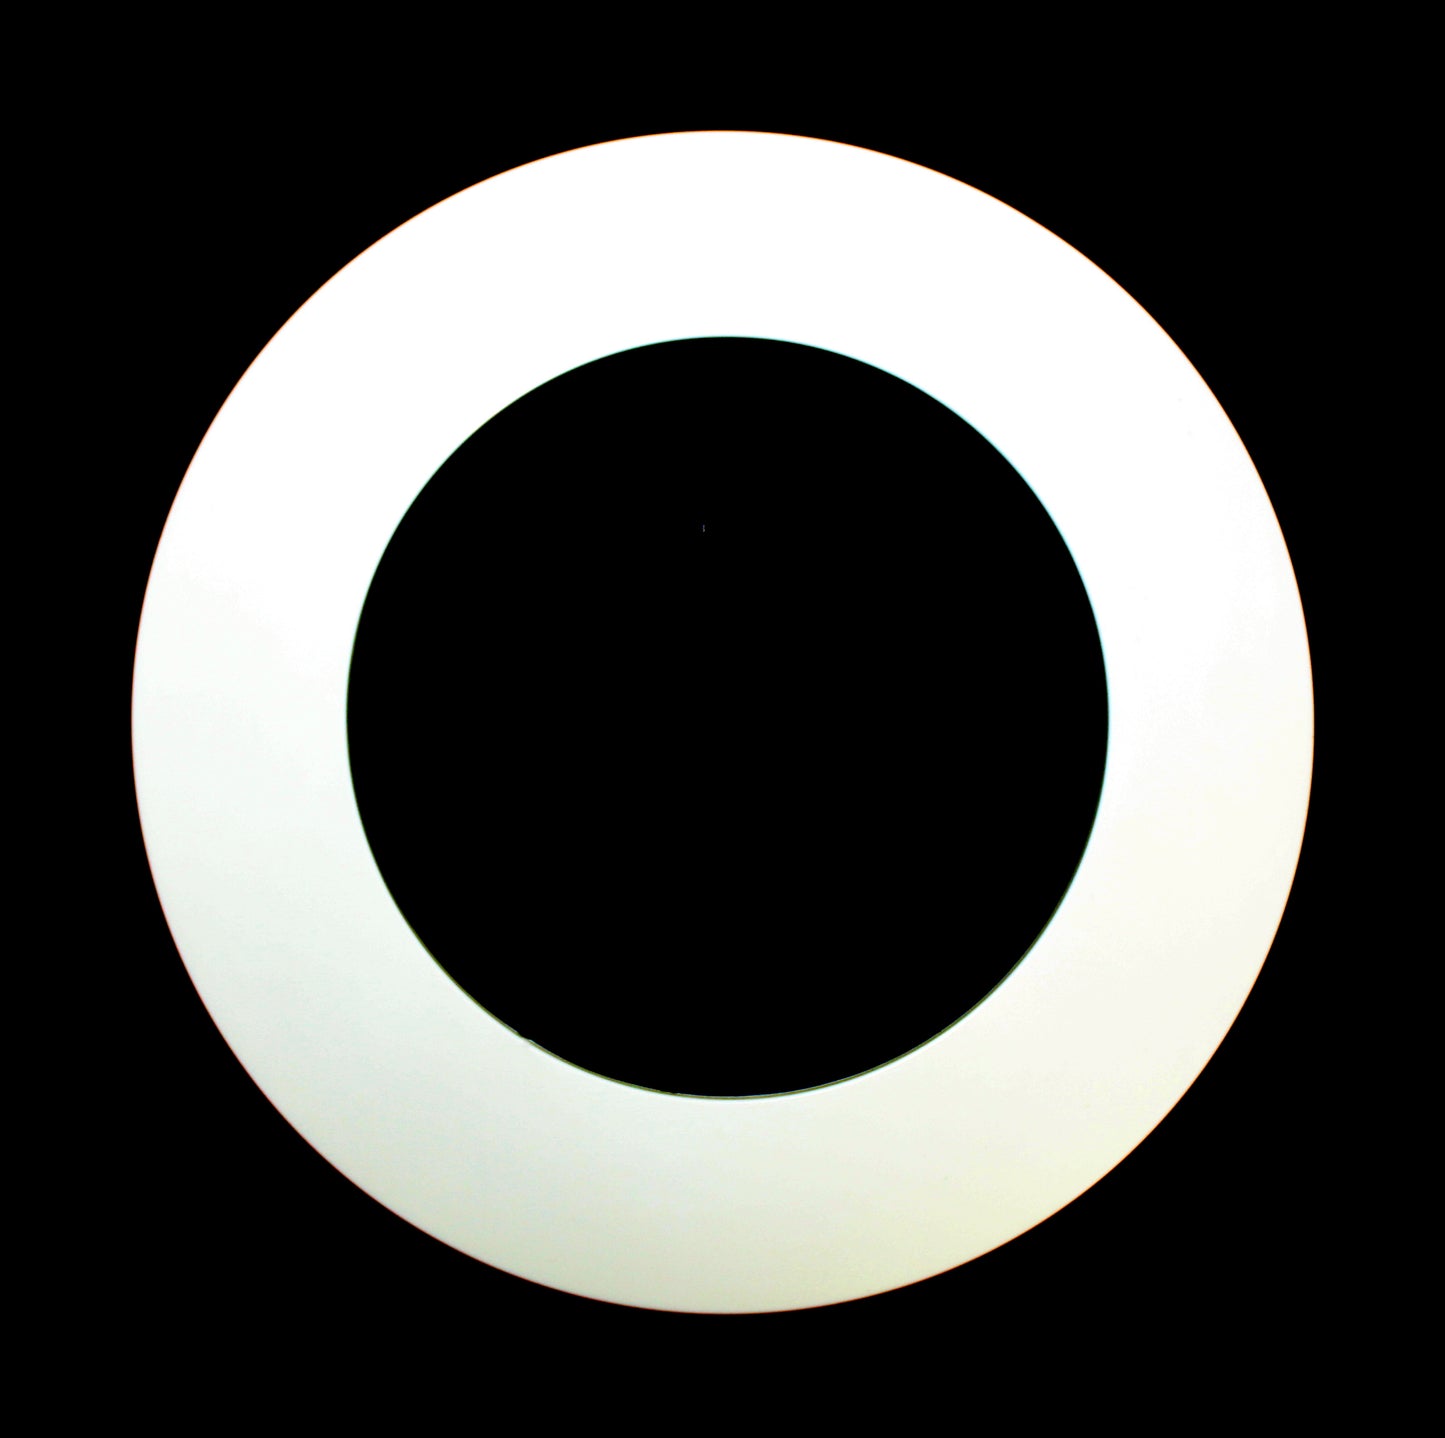 Plastic 4.25" Light Trim Goof Ring for 4" Inch Lighting Fixture Recessed Can - Black or White